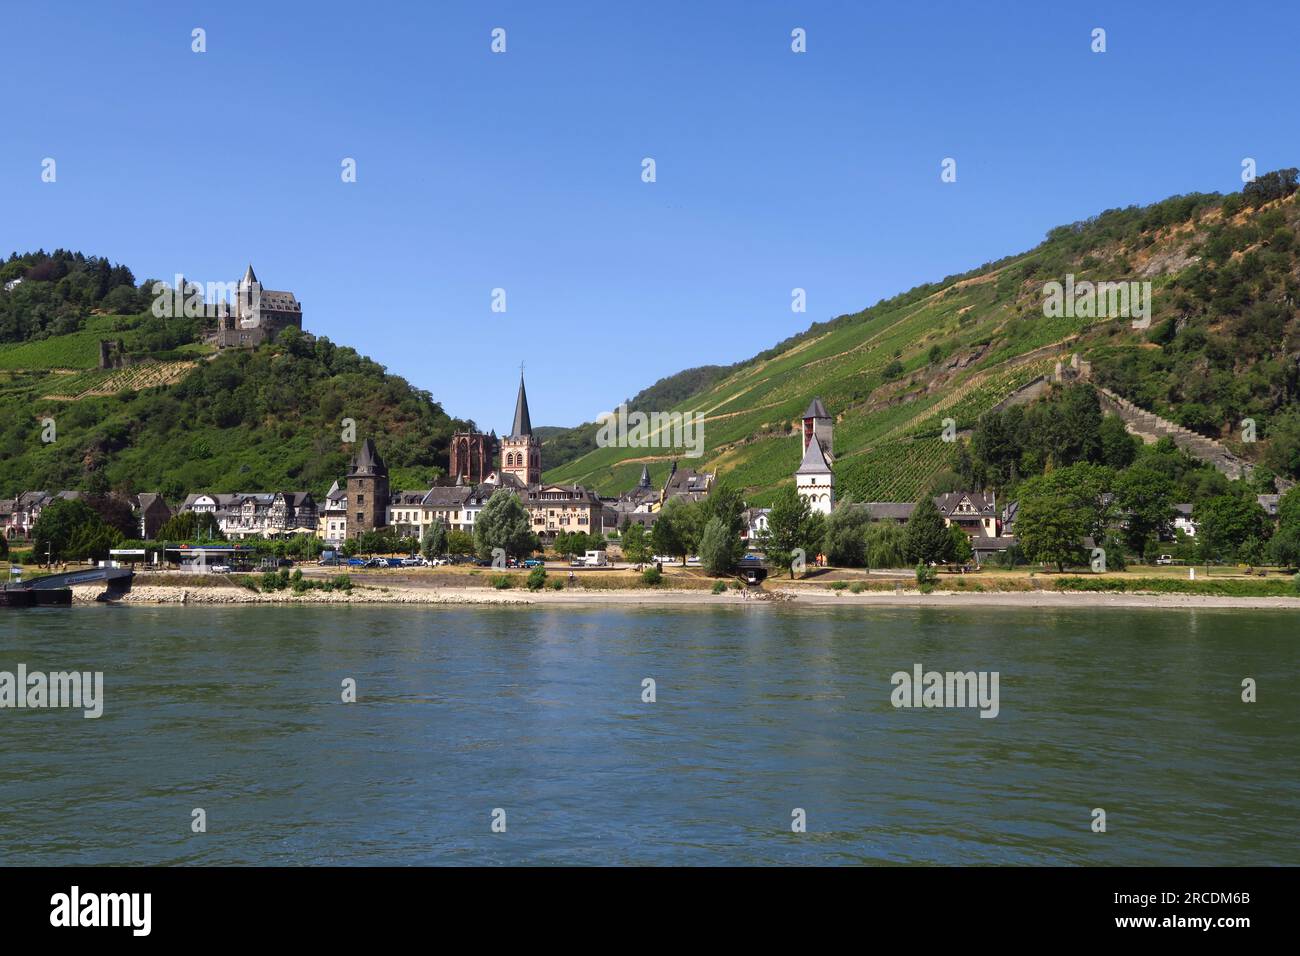 The village of Bacharach stands on the western bank of the River Rhine in Germany Stock Photo